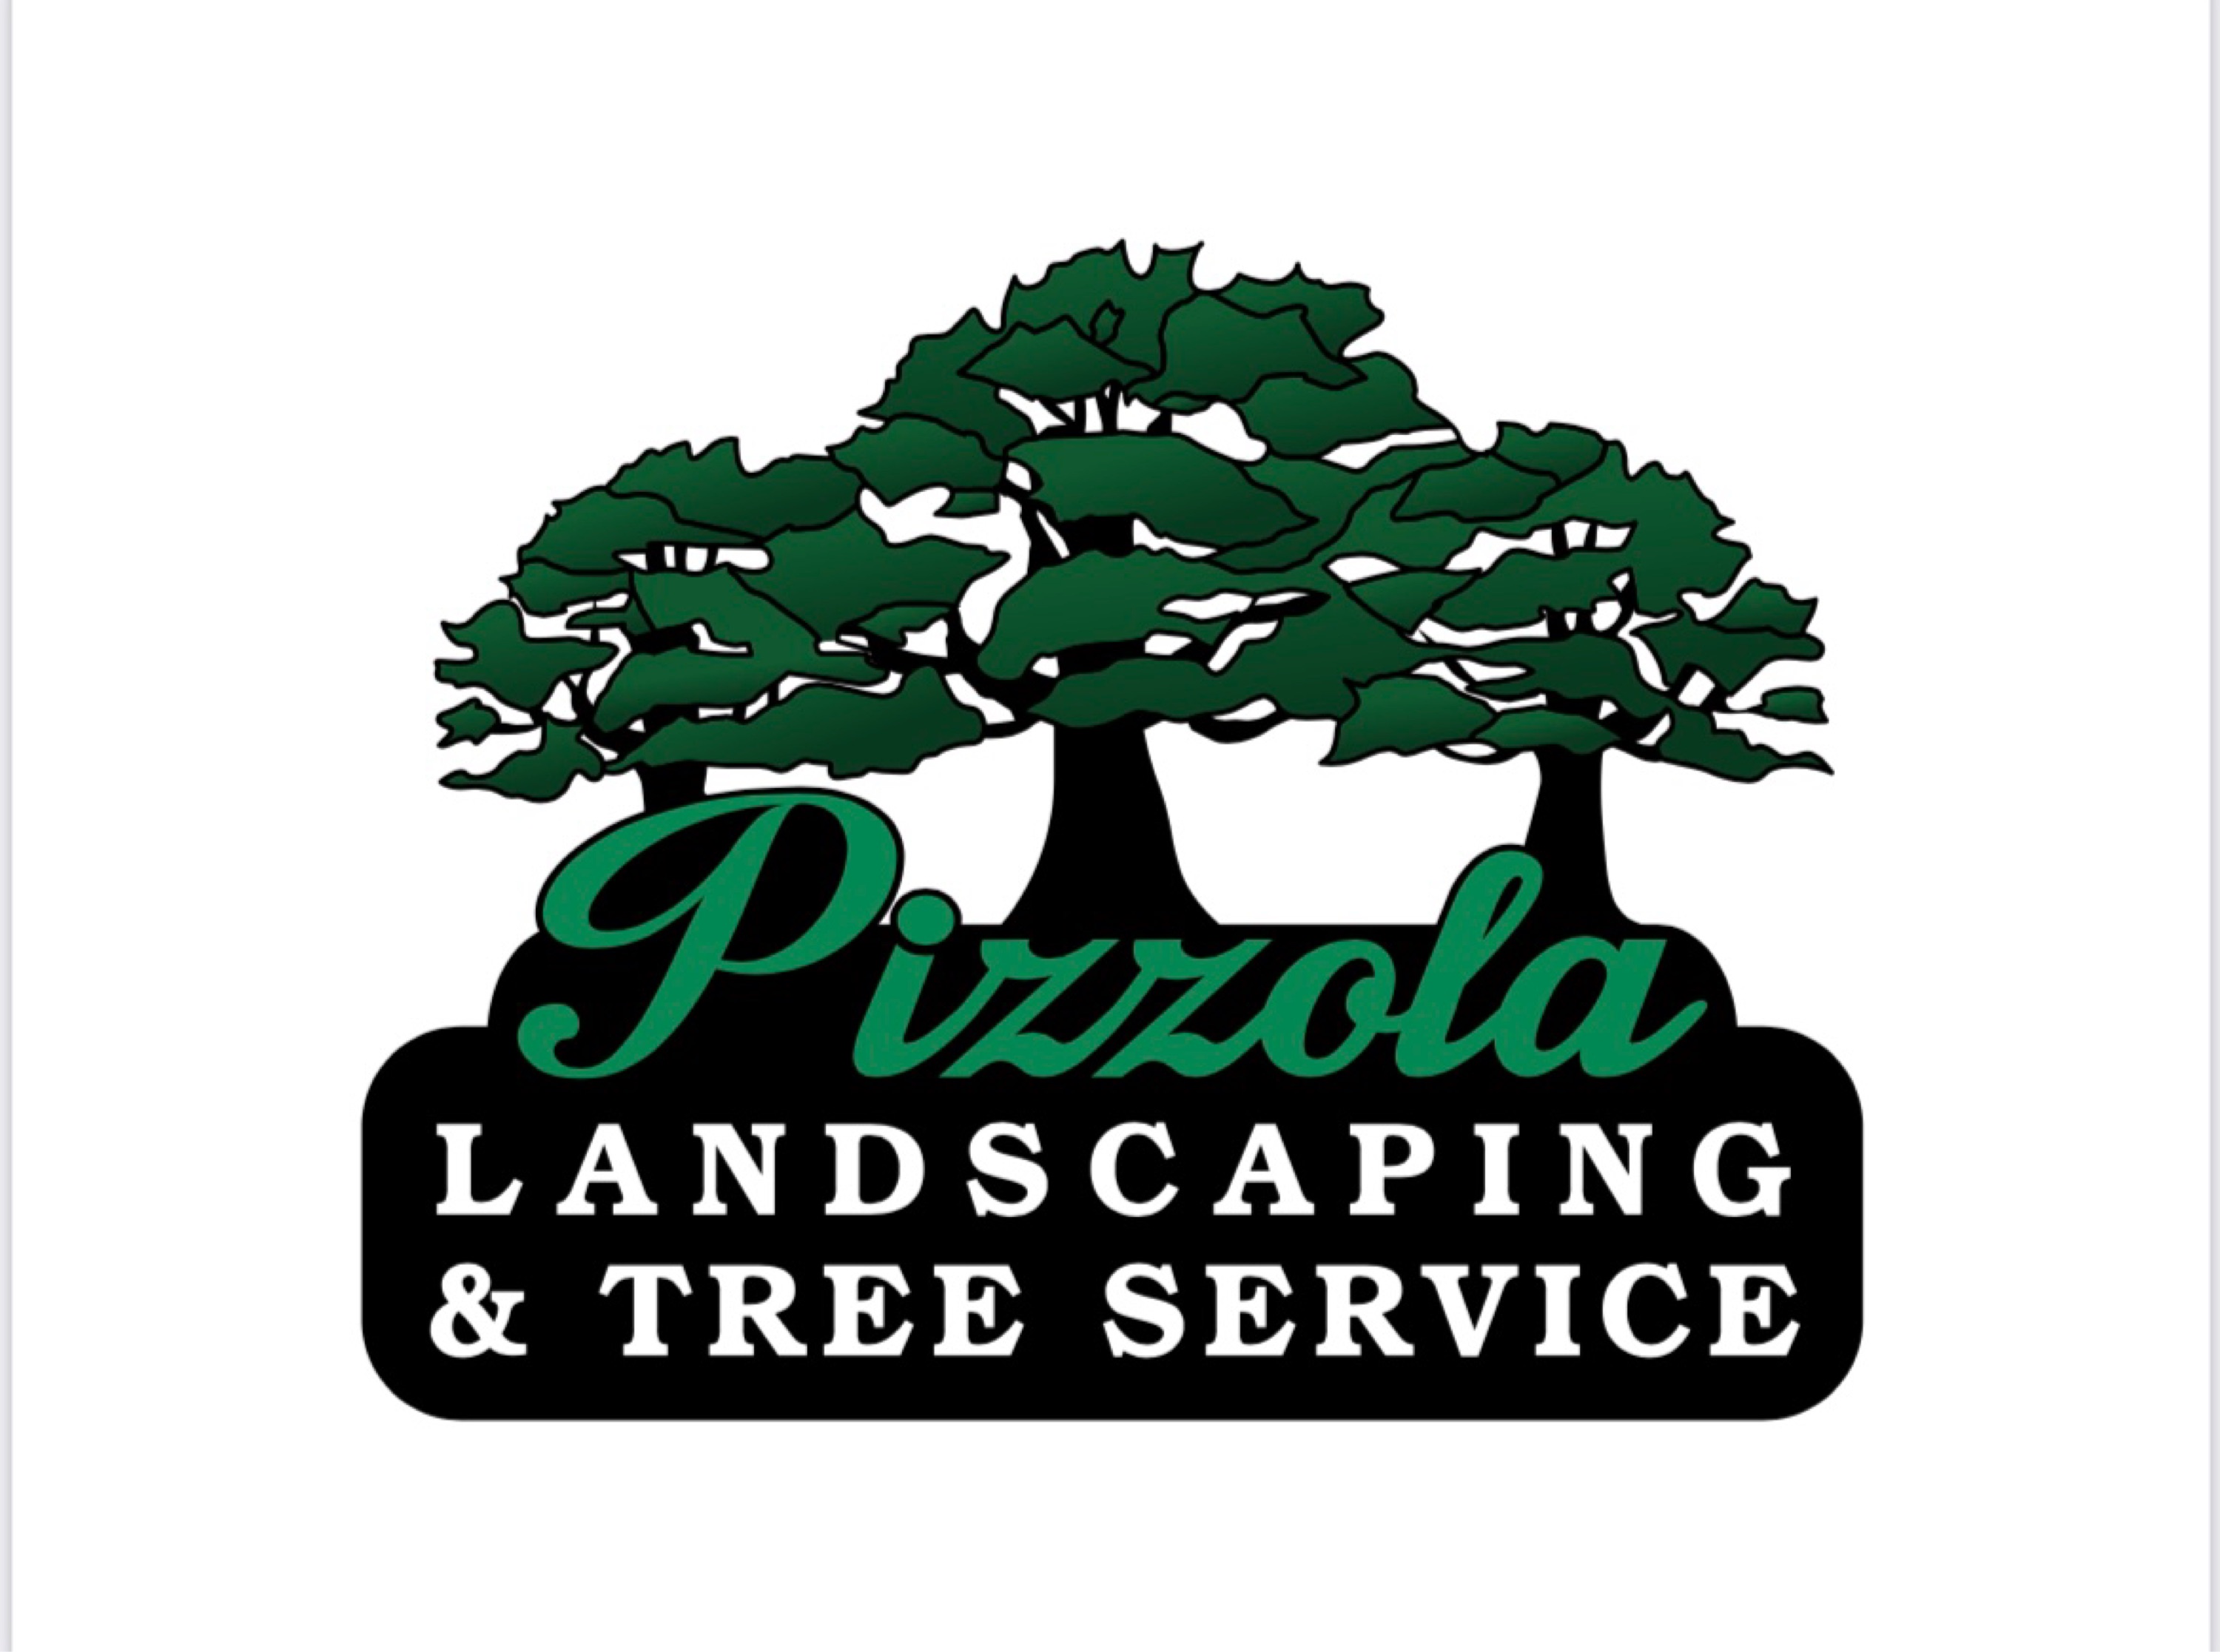 Pizzola Landscaping & Tree Service Logo